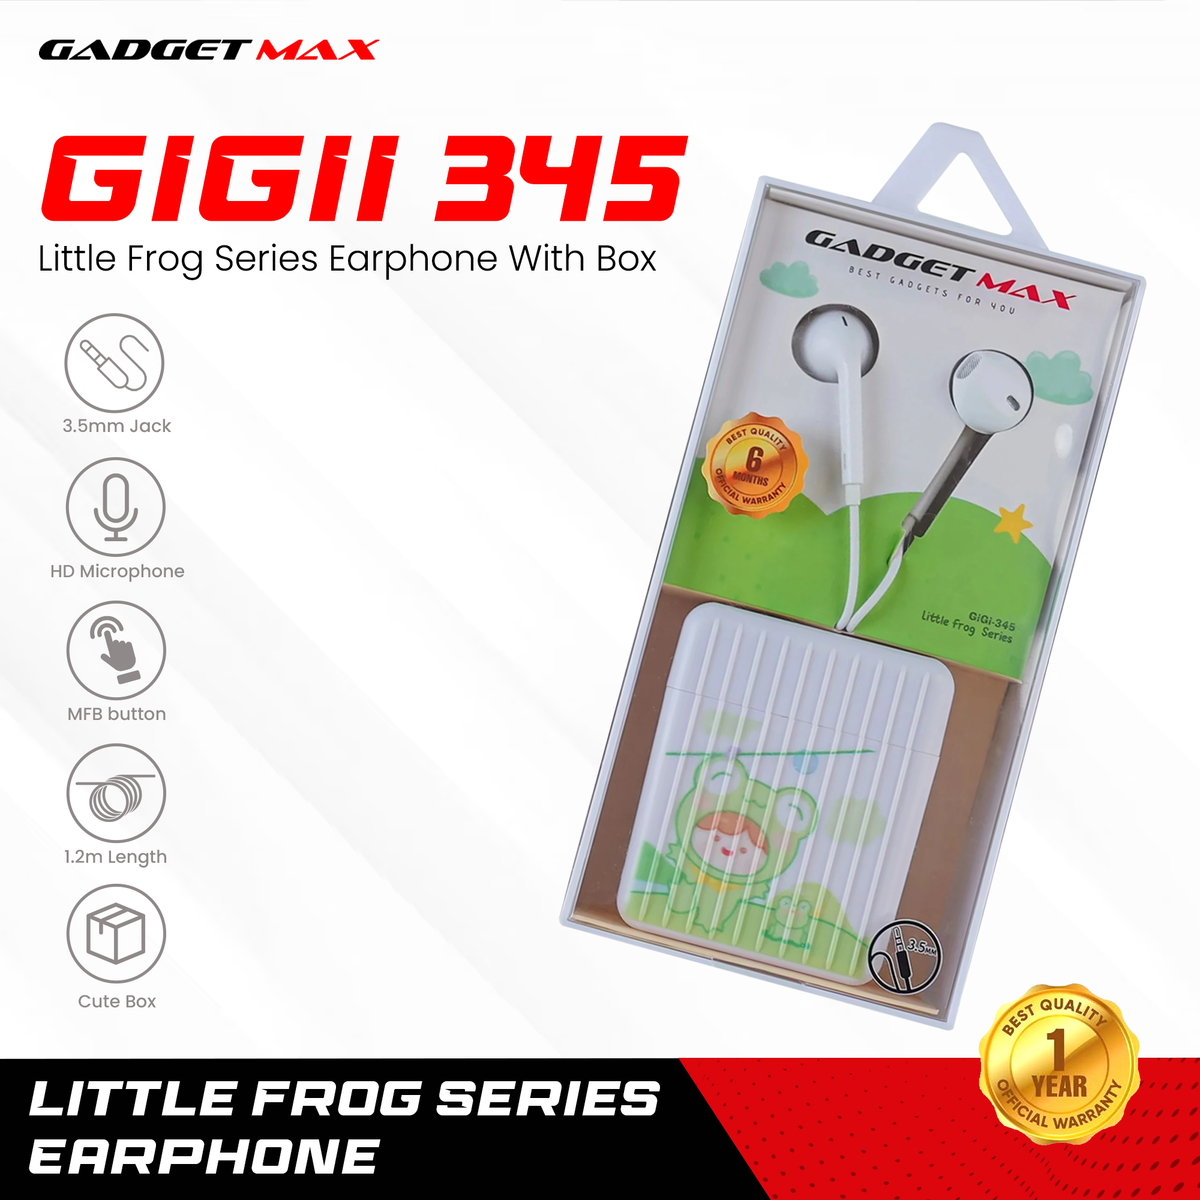 GADGET MAX GIGII-345 LITTLE FROG SERIES 3.5MM WIRED EARPHONE - WHITE